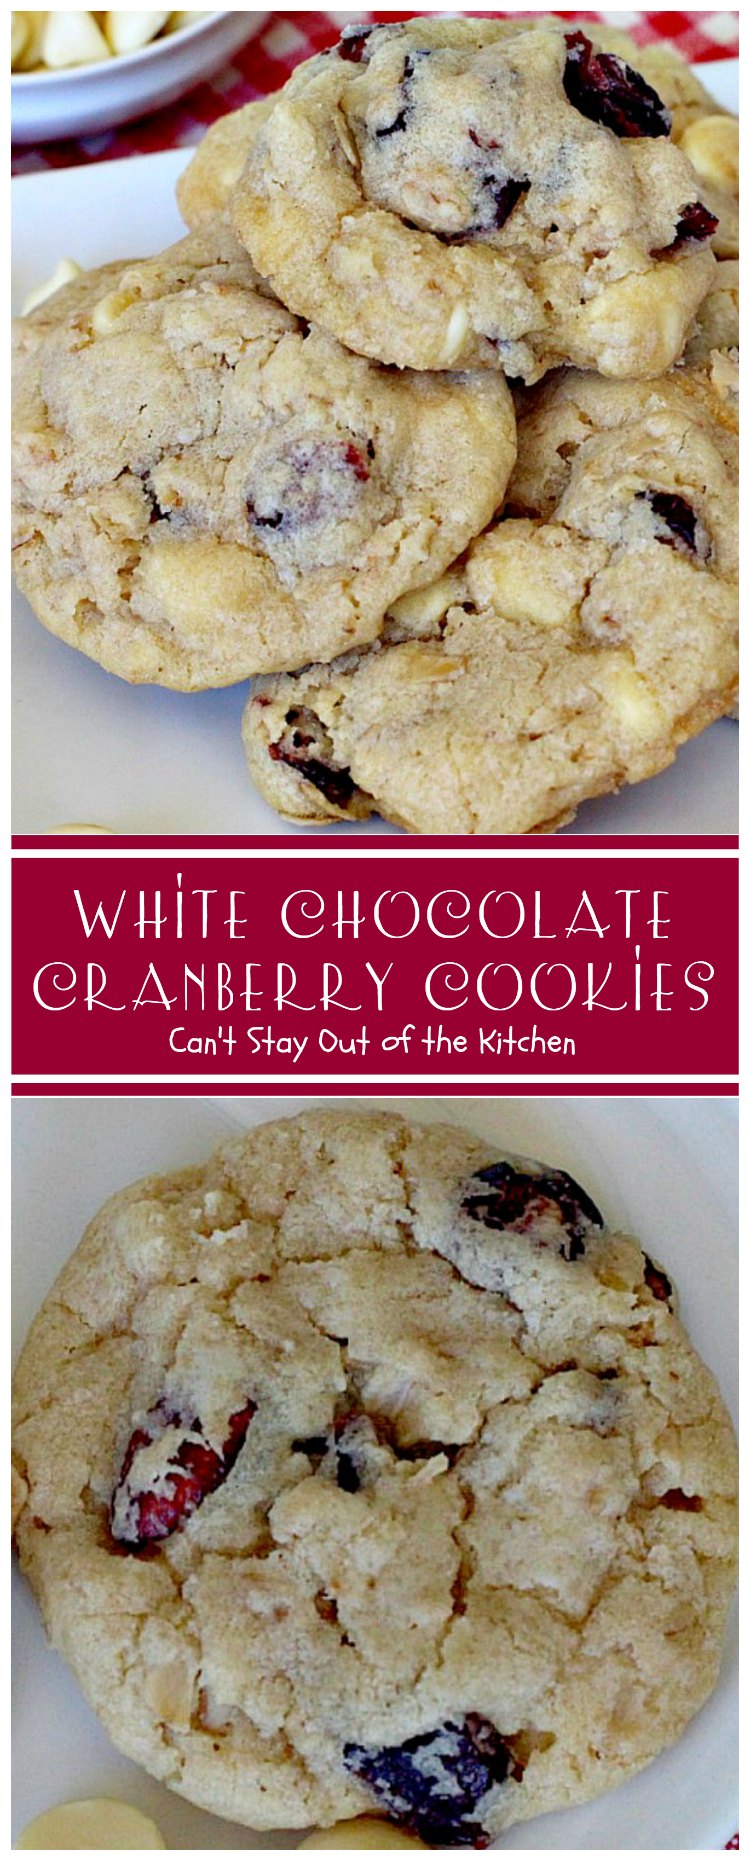 White Chocolate Cranberry Cookies | Can't Stay Out of the Kitchen